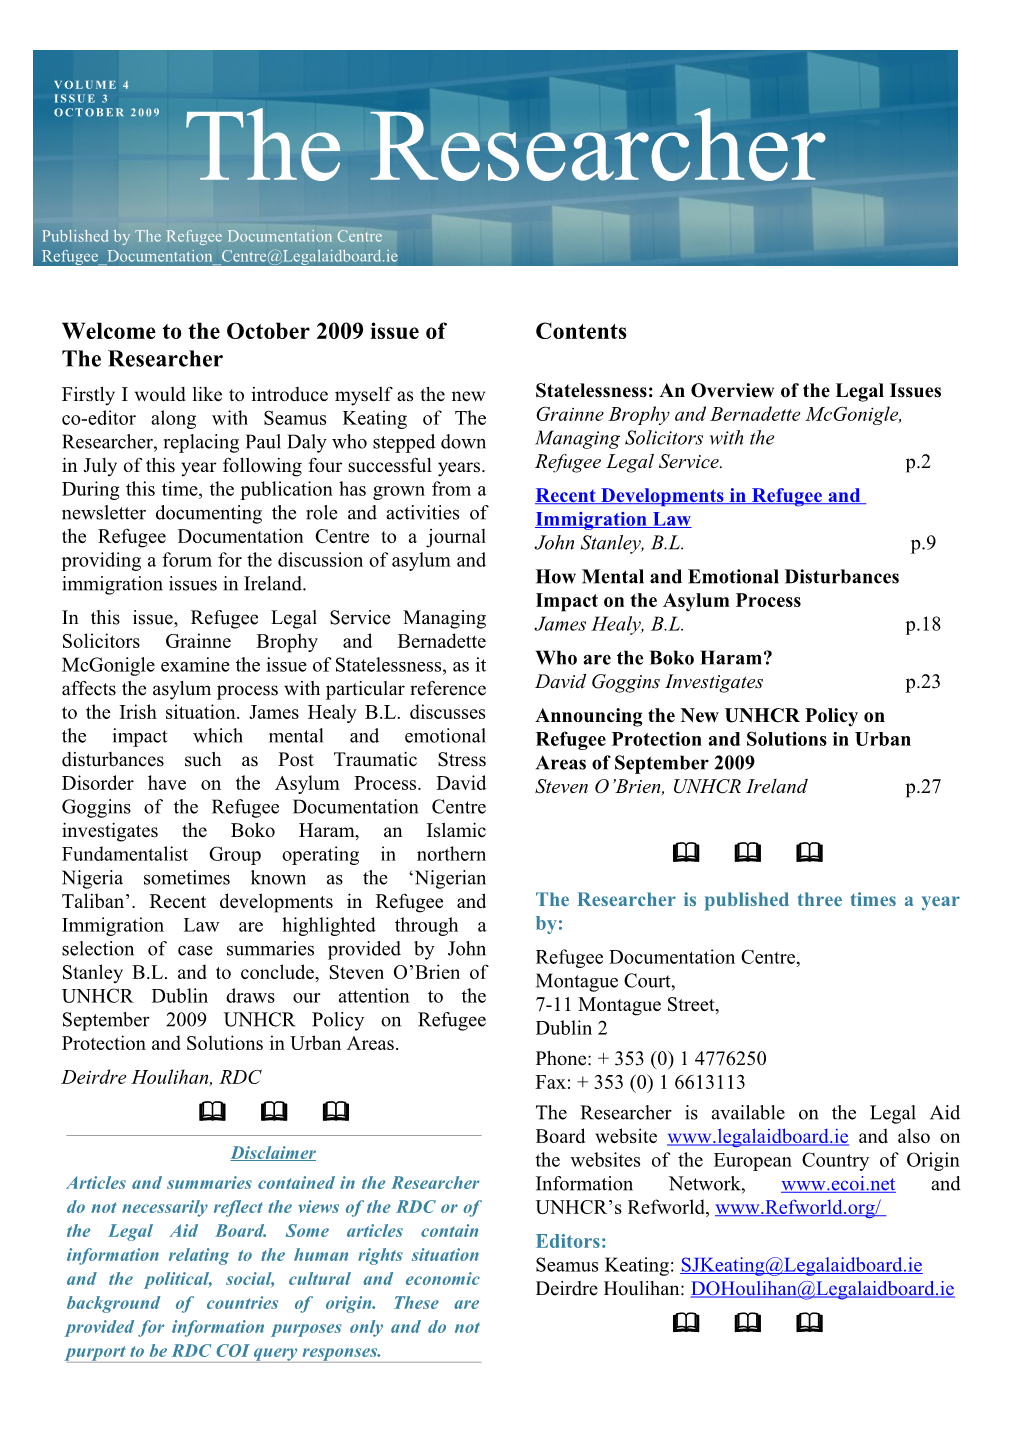 Welcome to the October 2009 Issue of the Researcher